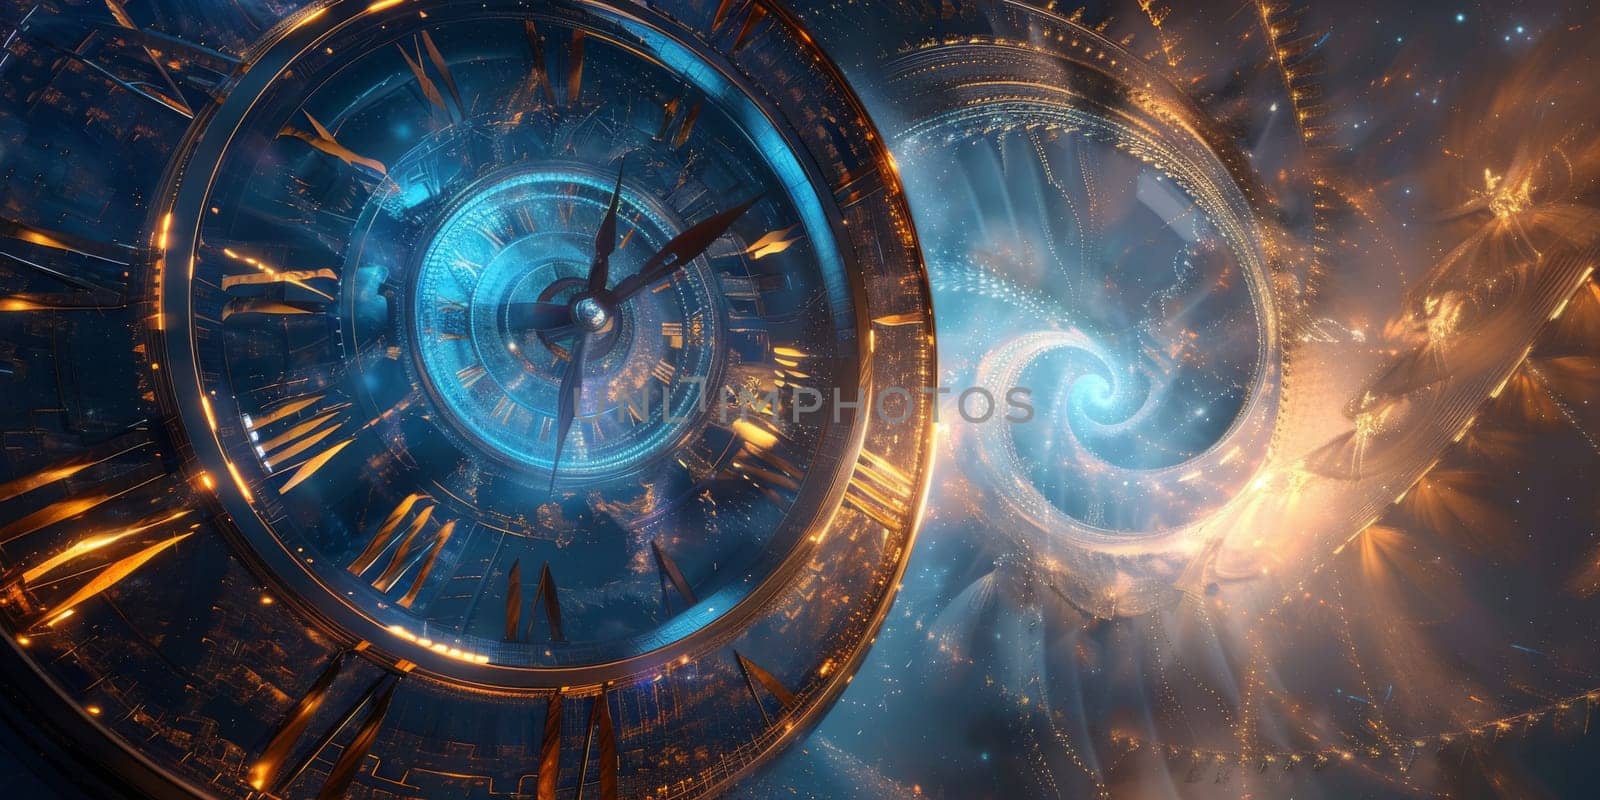 Futuristic time machine with go back in time spiral technology by Kadula